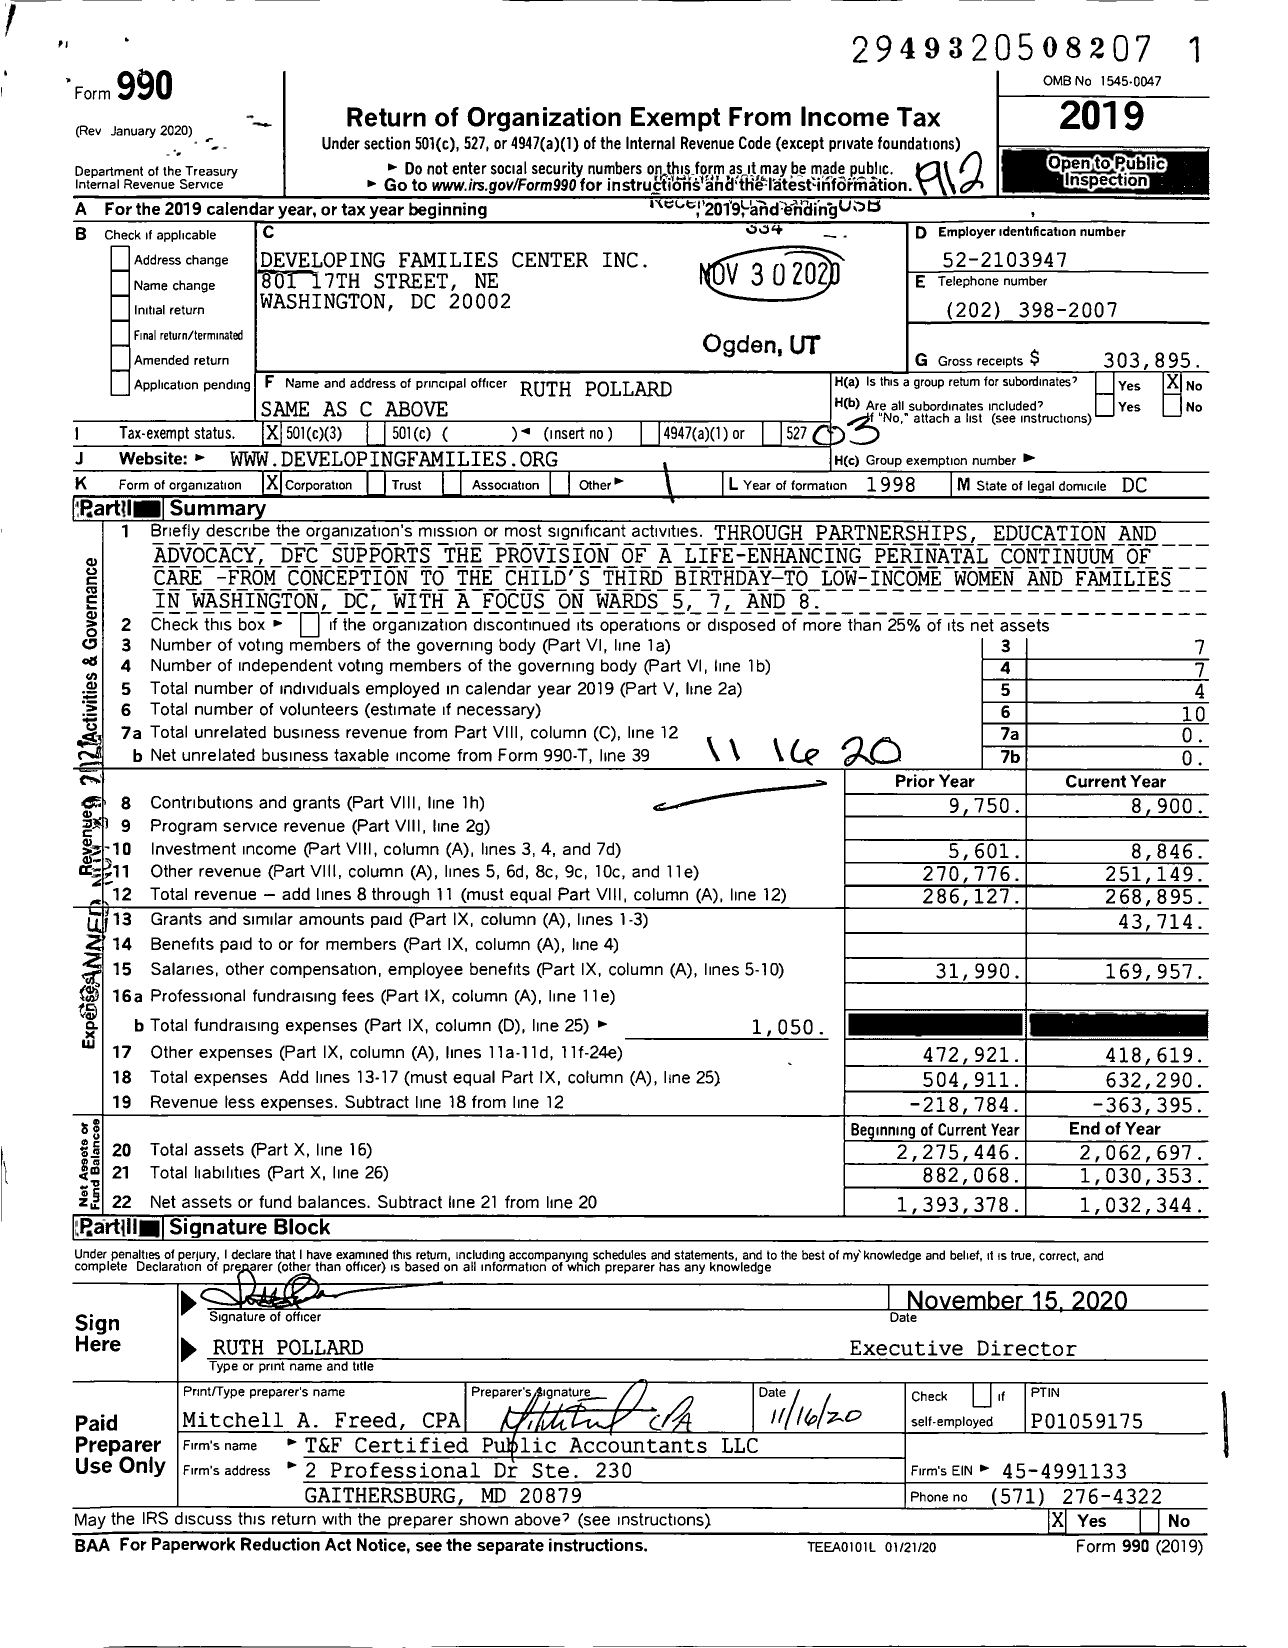 Image of first page of 2019 Form 990 for Developing Families Center